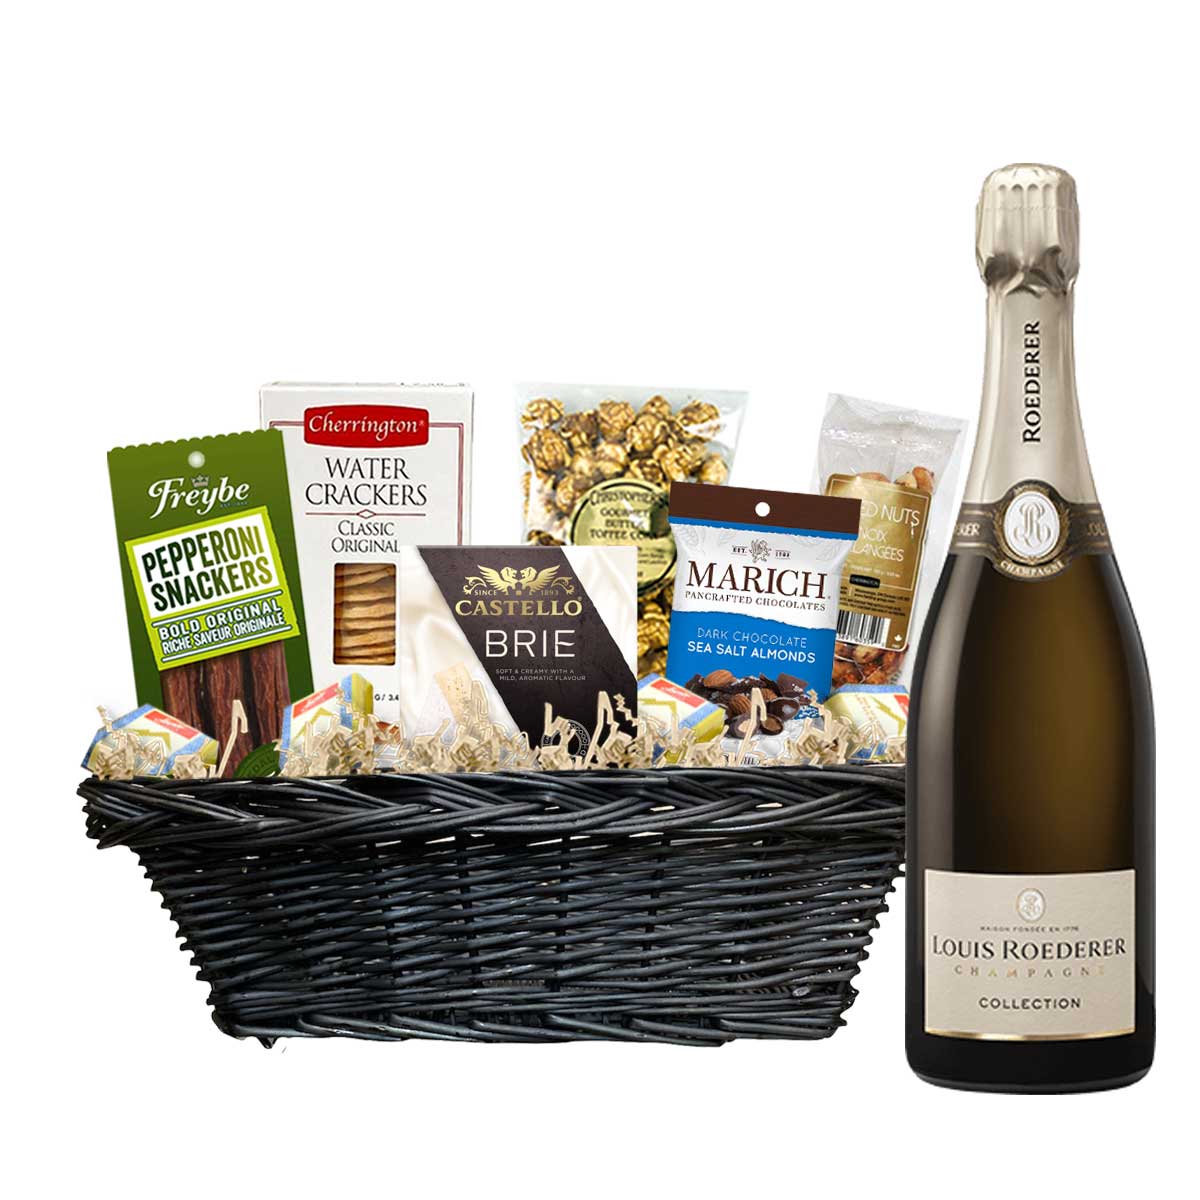 TAG Liquor Stores Canada Delivery-Louis Roederer 243 Champagne 750ml Corporate Gift Basket-wine-tagliquorstores.com